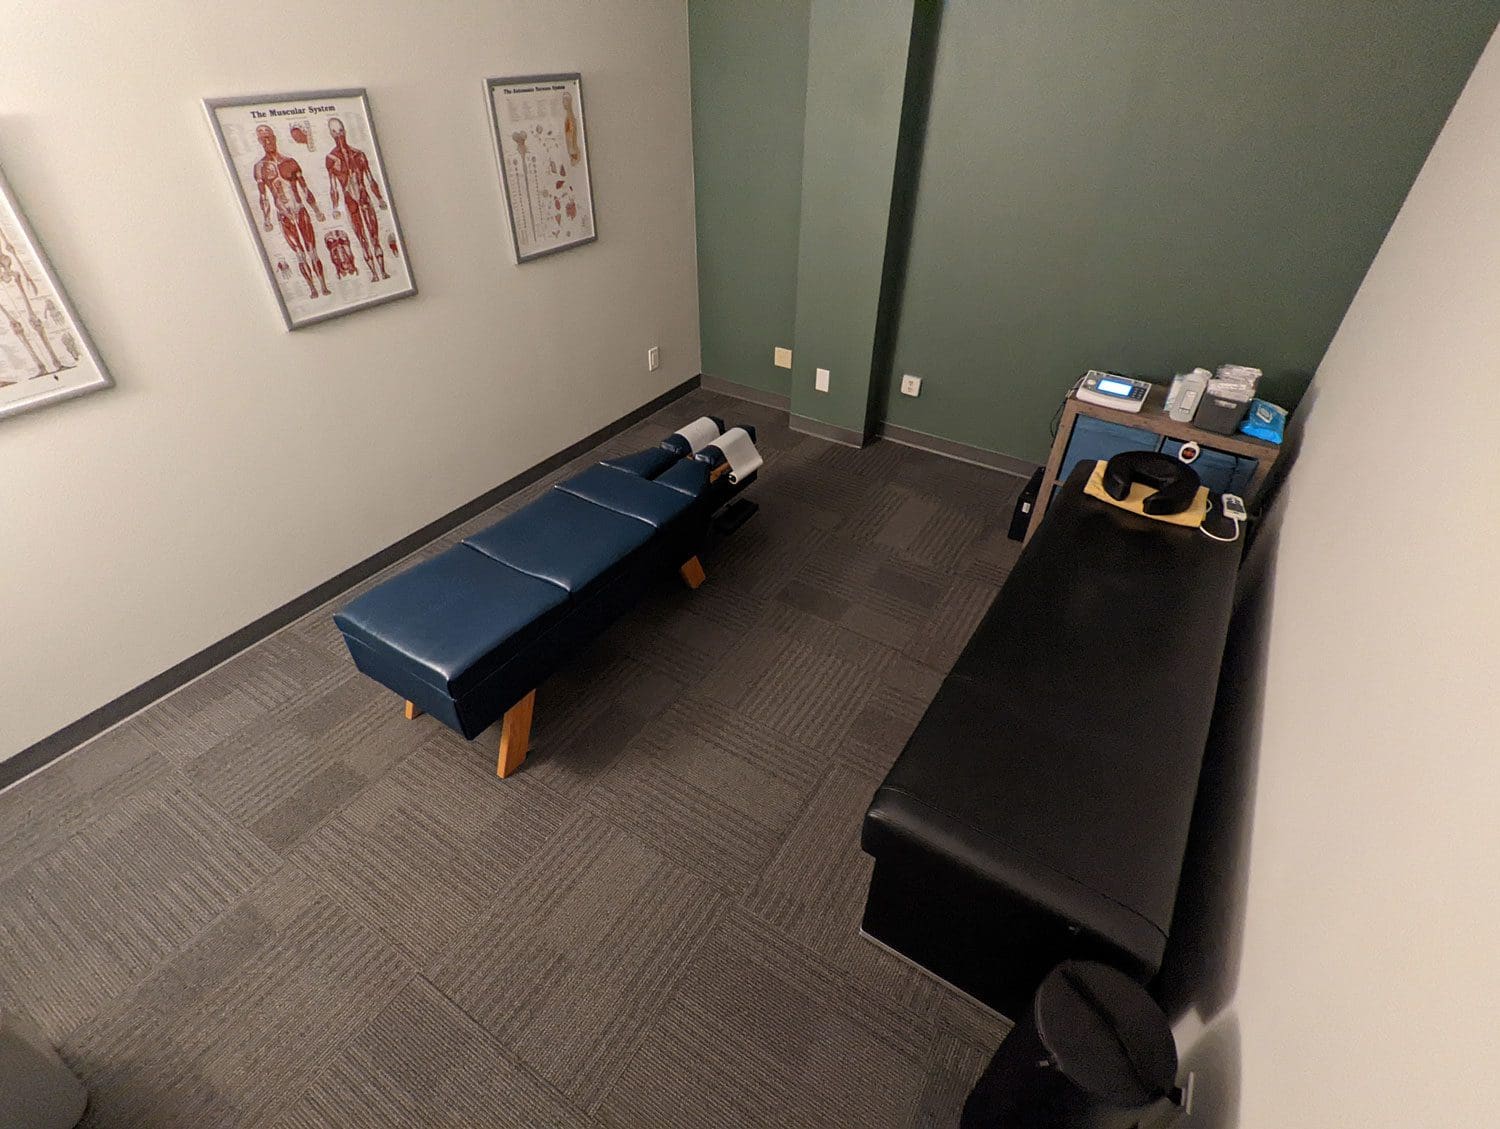 Woodburn Chiropracitc treatment room with adjustment table and framed art of the musculoskeletal system.